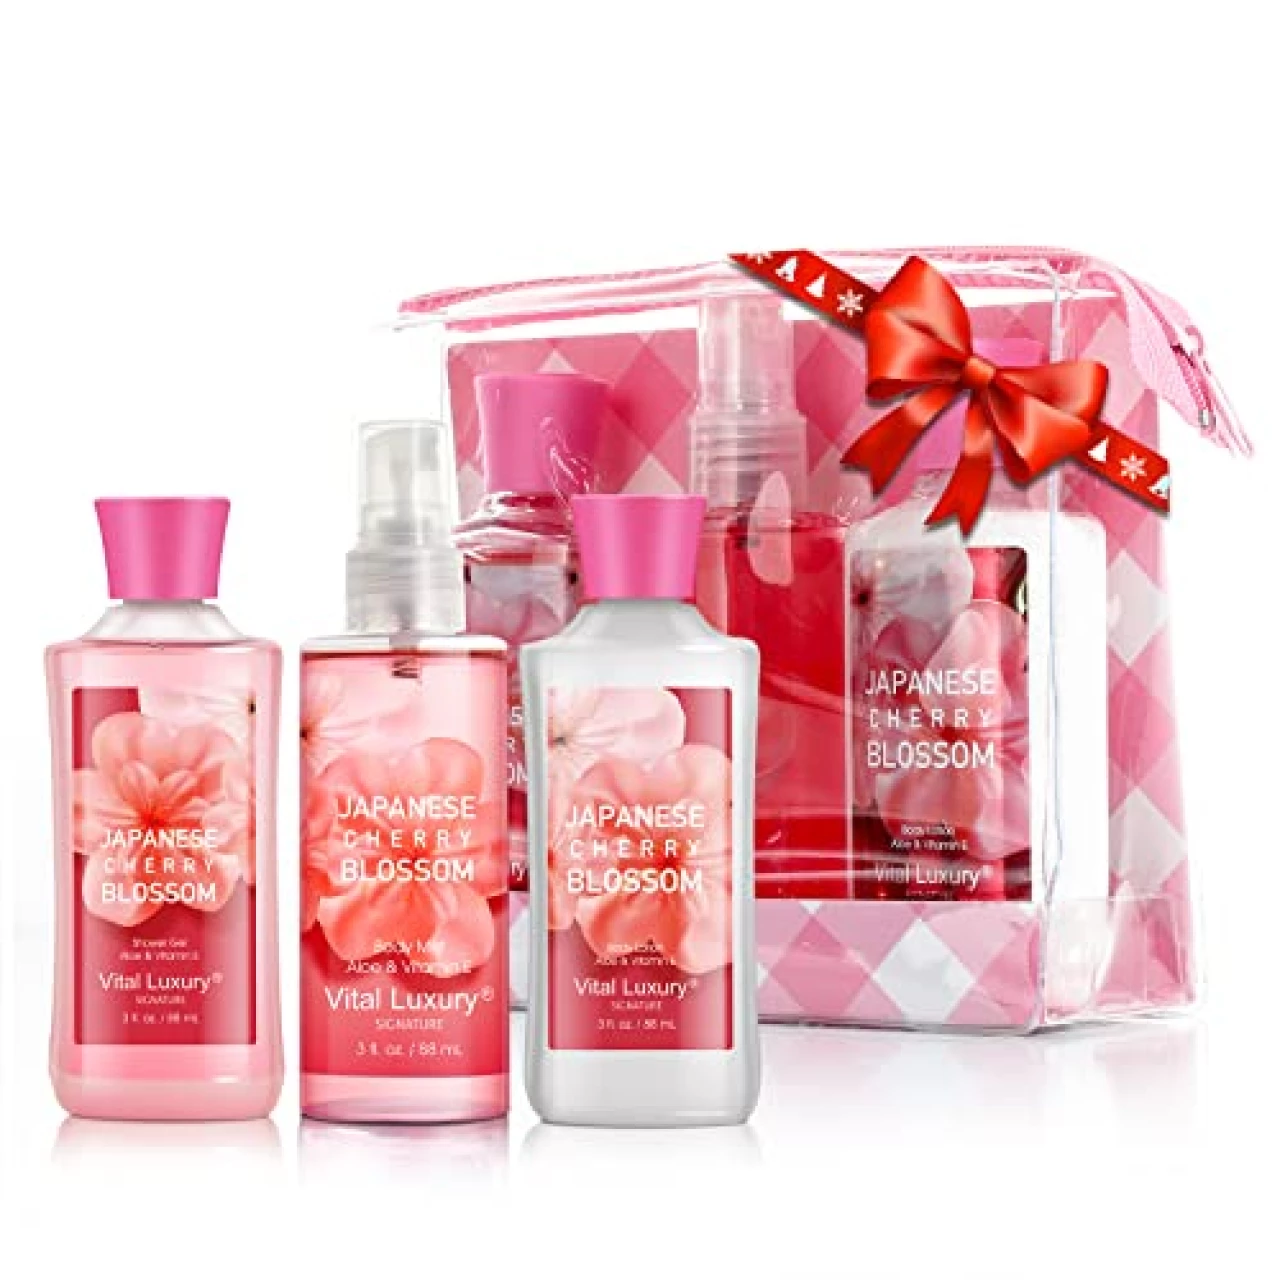 Vital Luxury Bath &amp; Body Care Travel Set - Home Spa Set with Body Lotion, Shower Gel and Fragrance Mist, Valentines Day Gifts for Her and Him(Japanese Cherry Blossom)